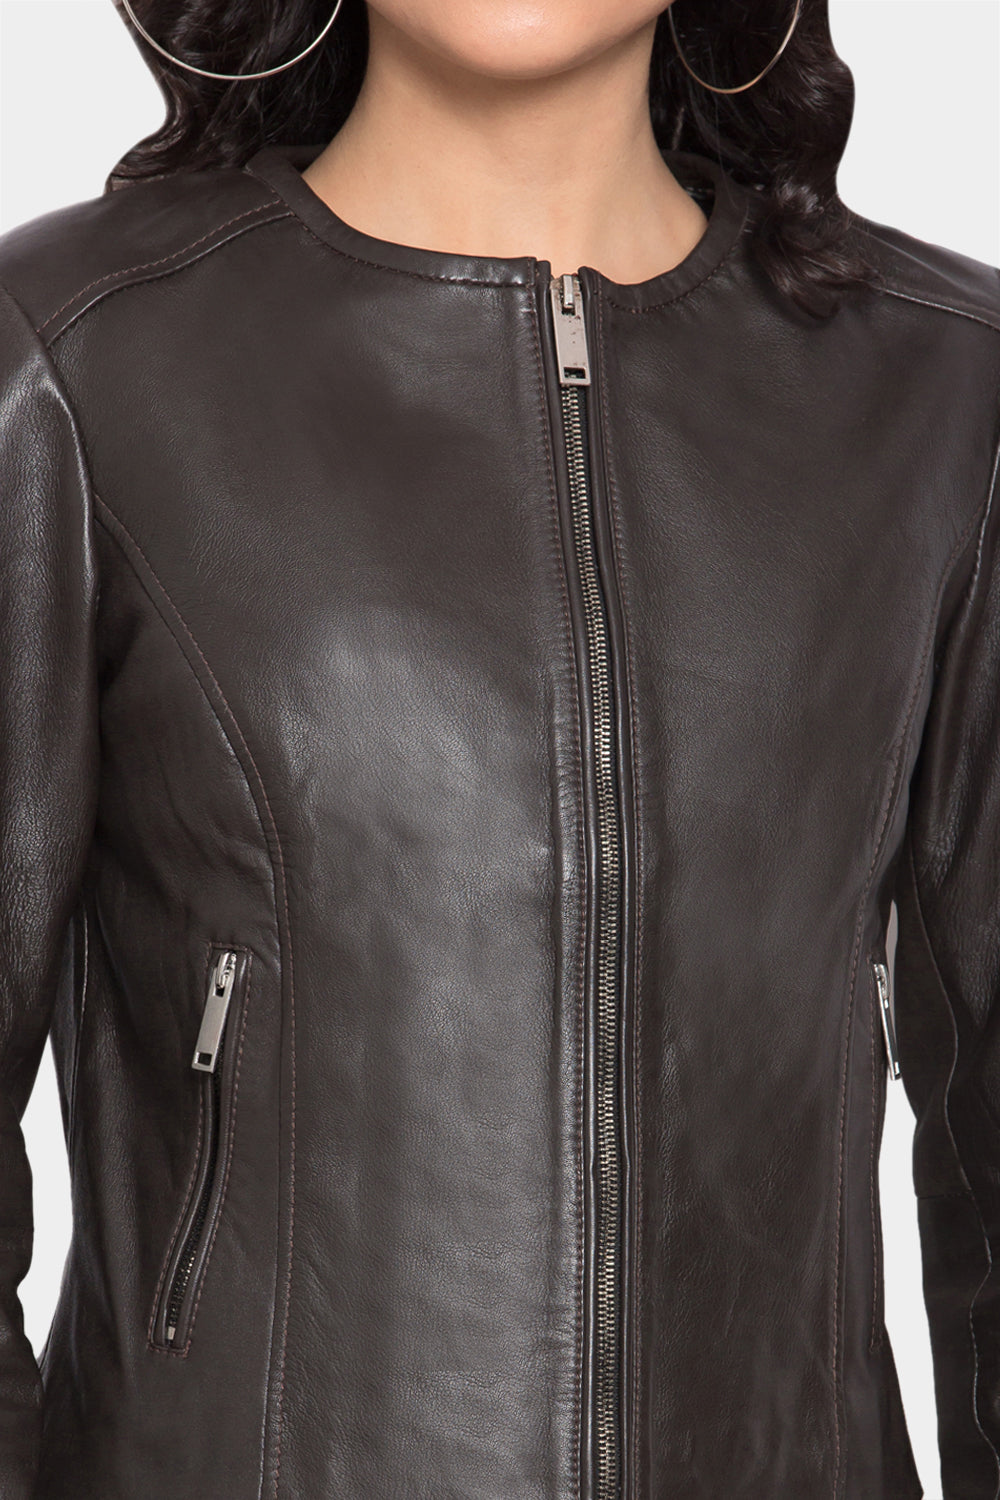 "Justbrown" Skinny Fit Leather Jacket